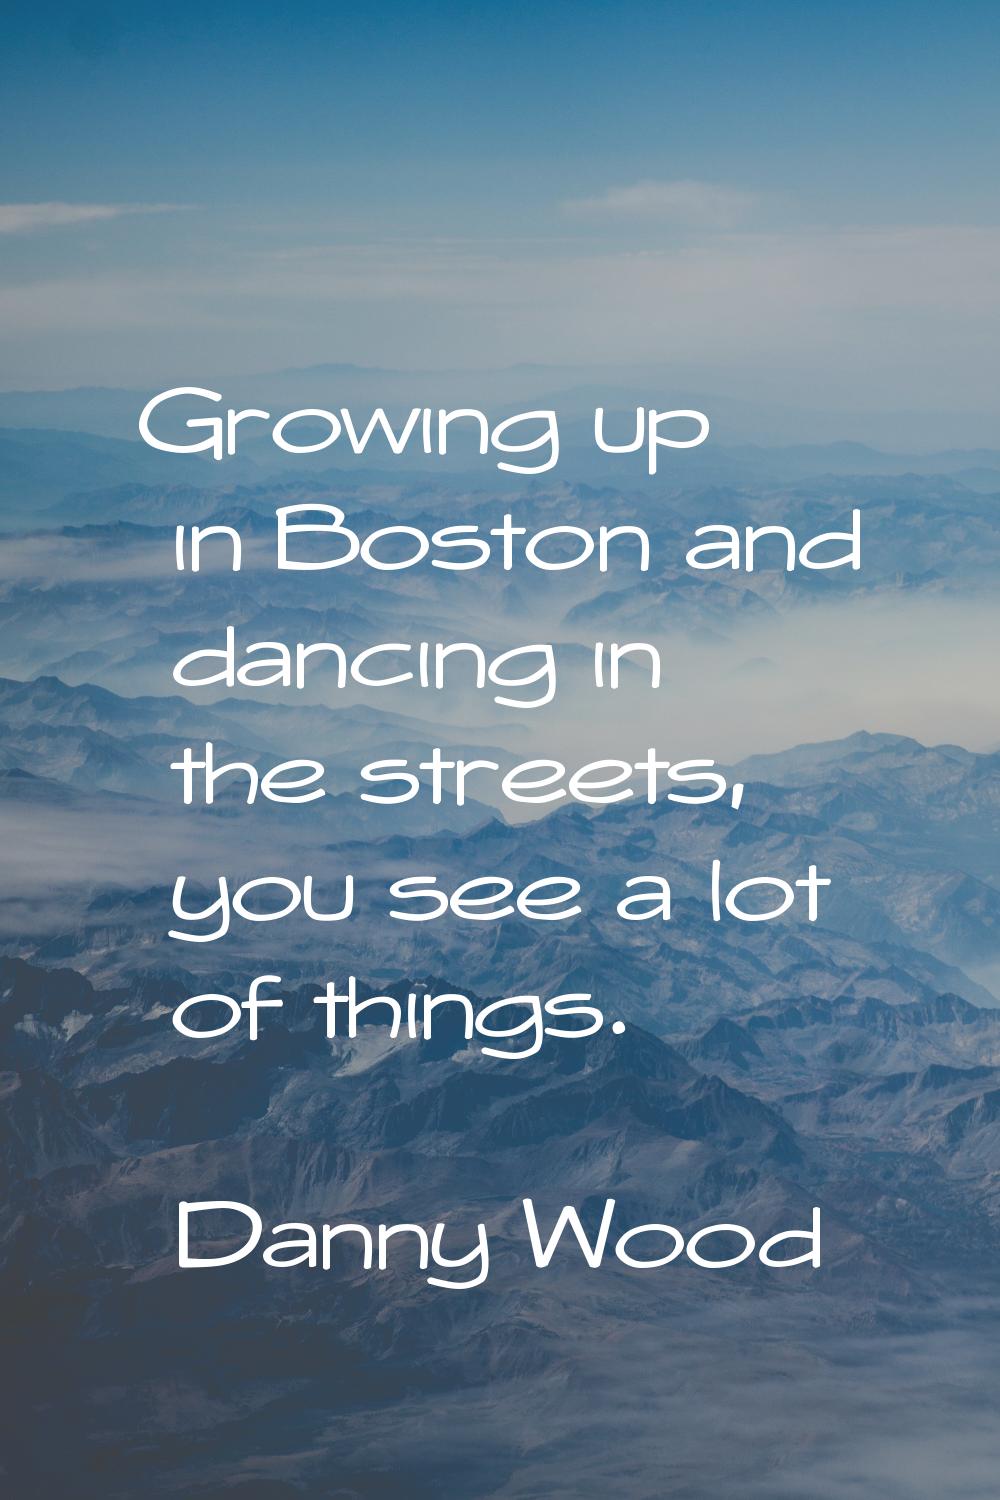 Growing up in Boston and dancing in the streets, you see a lot of things.